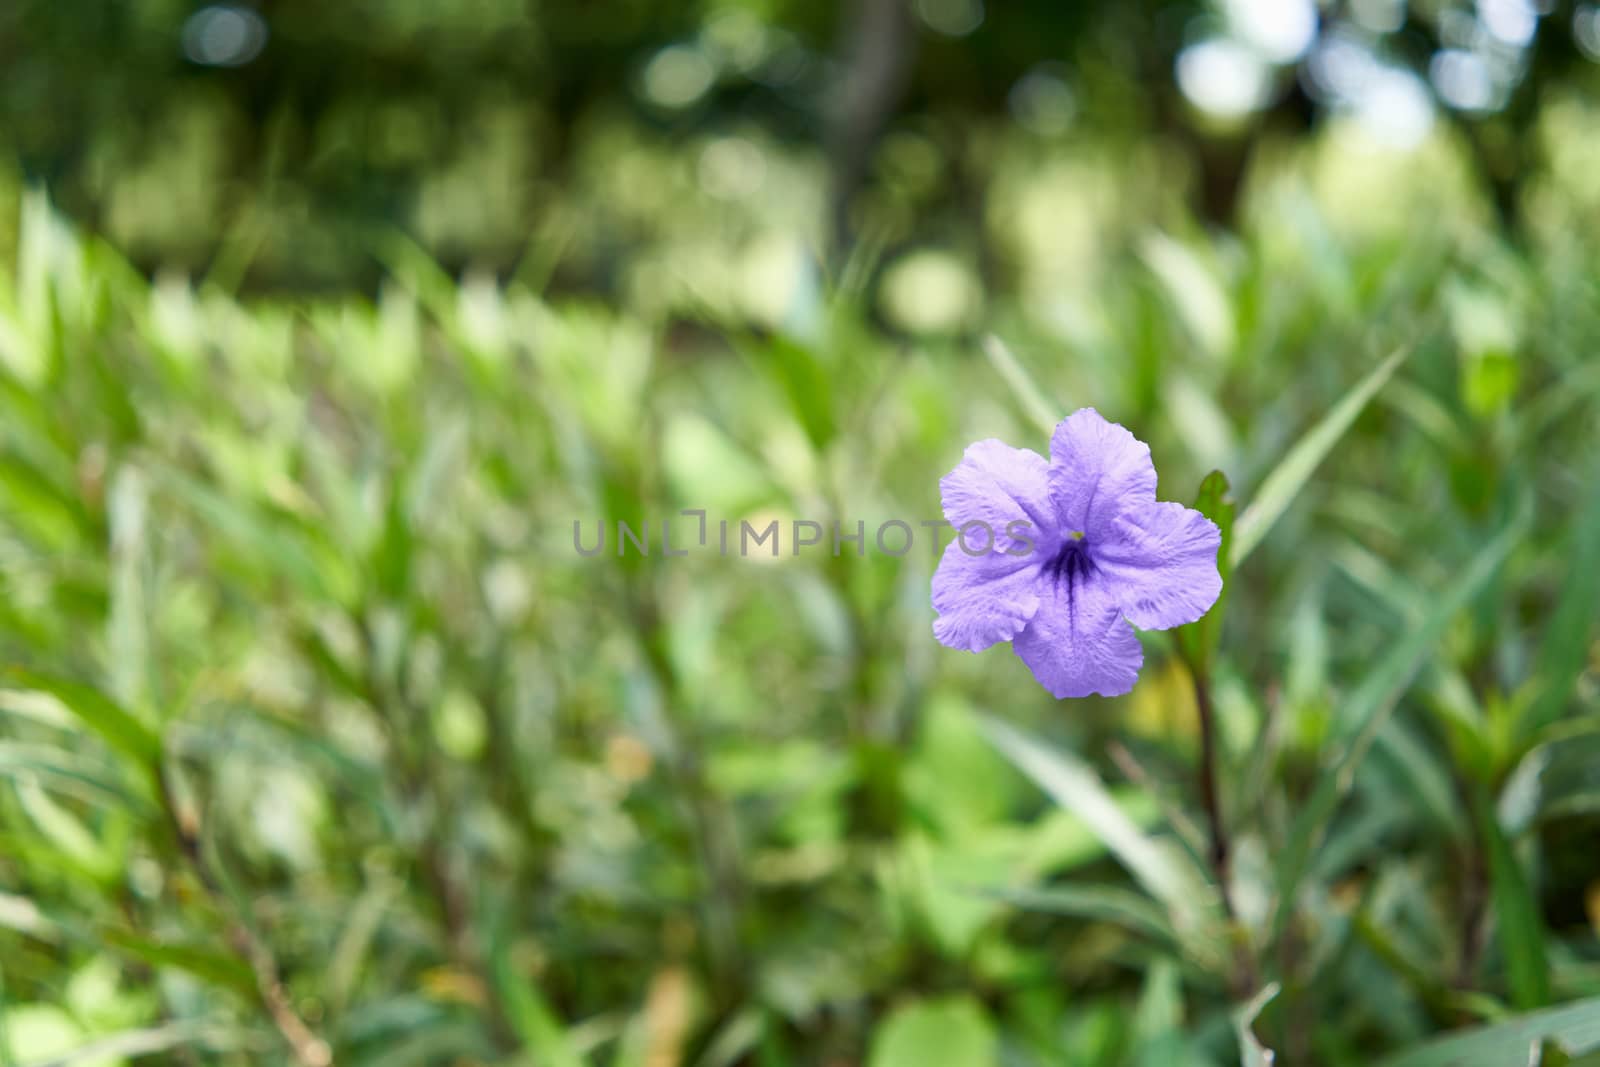 Ruellia tuberosa or Toi ting flower have violet color and green leaf tapering with copy space.